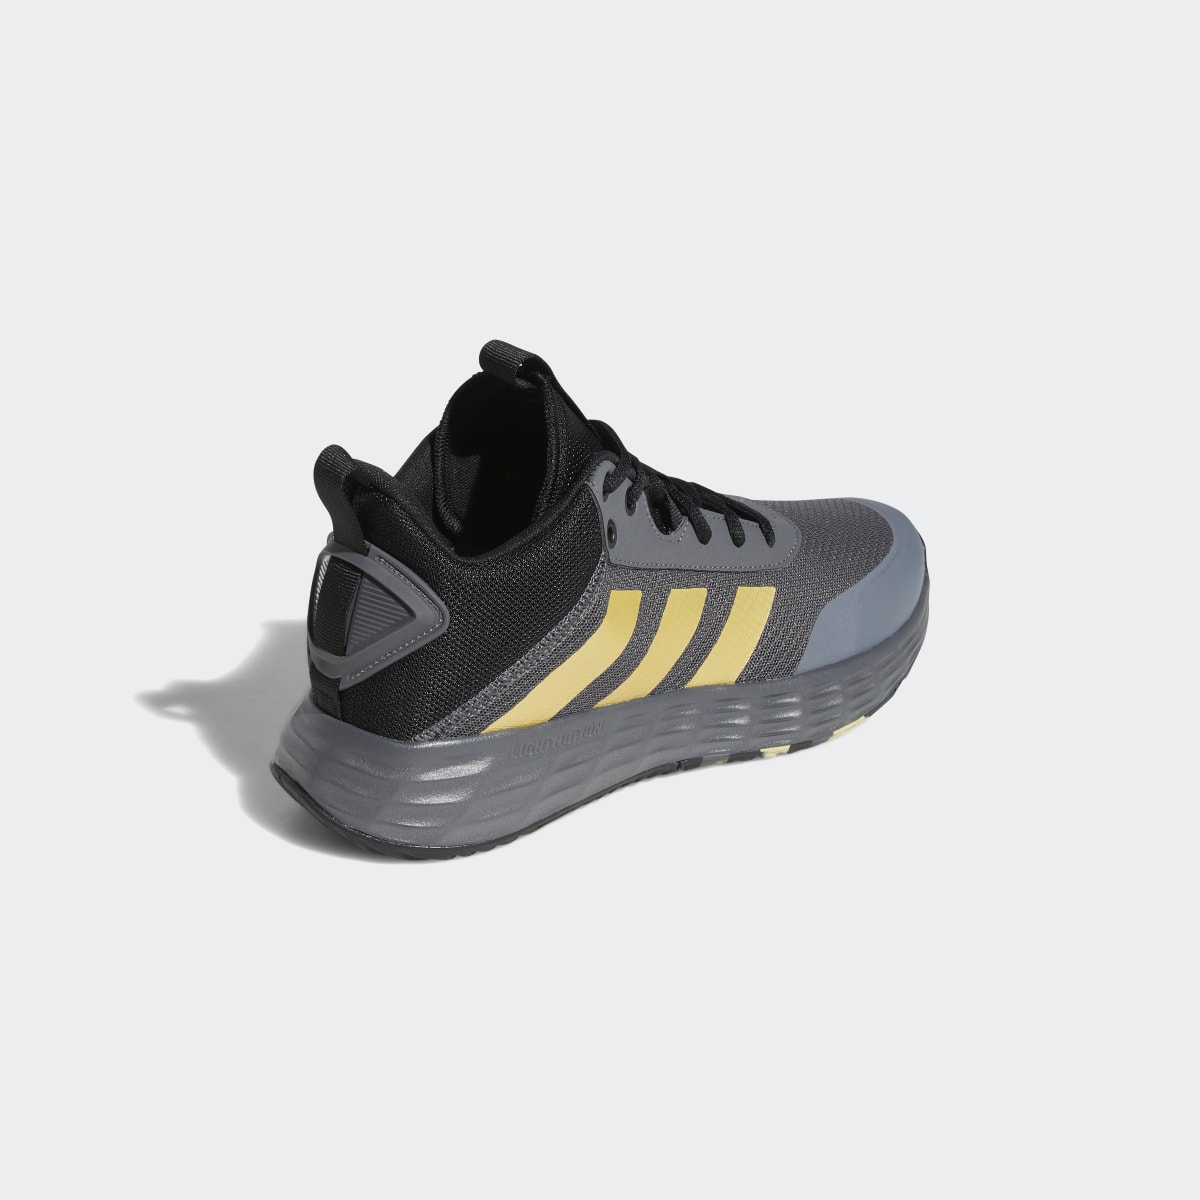 Adidas Ownthegame Shoes. 6